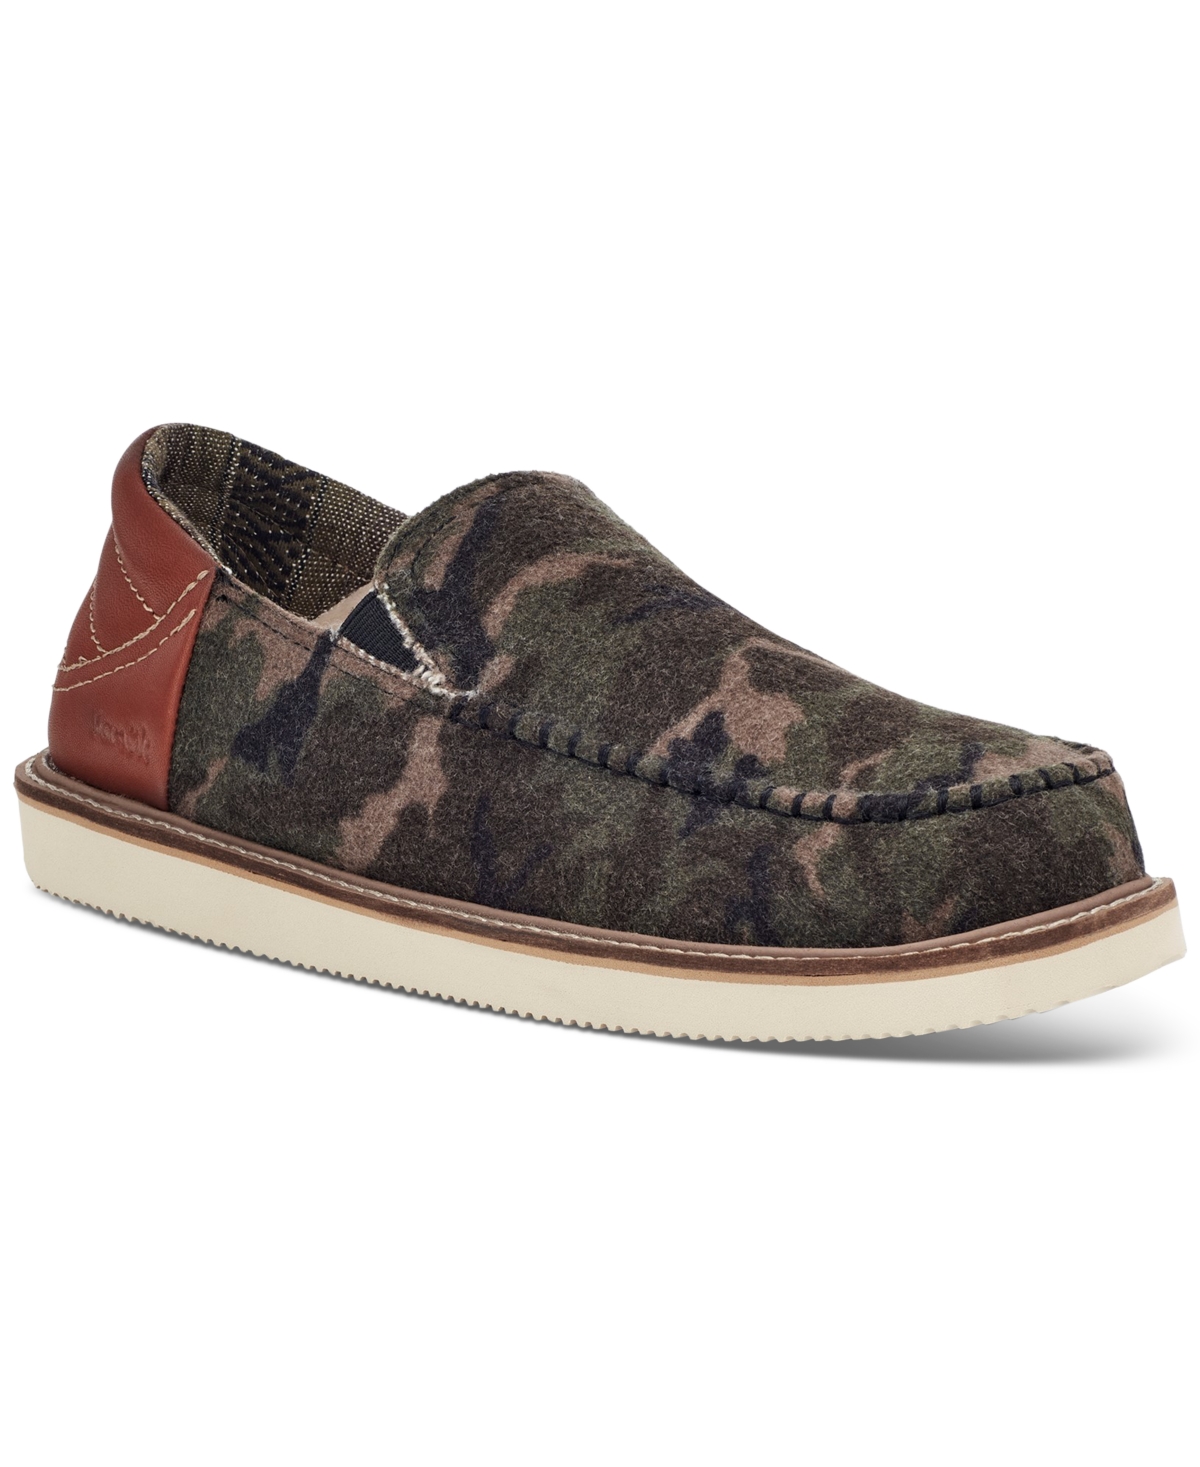 Men's Cozy Vibe Low Sm Camouflage Collapsible Heel Slippers - Woodland Camo